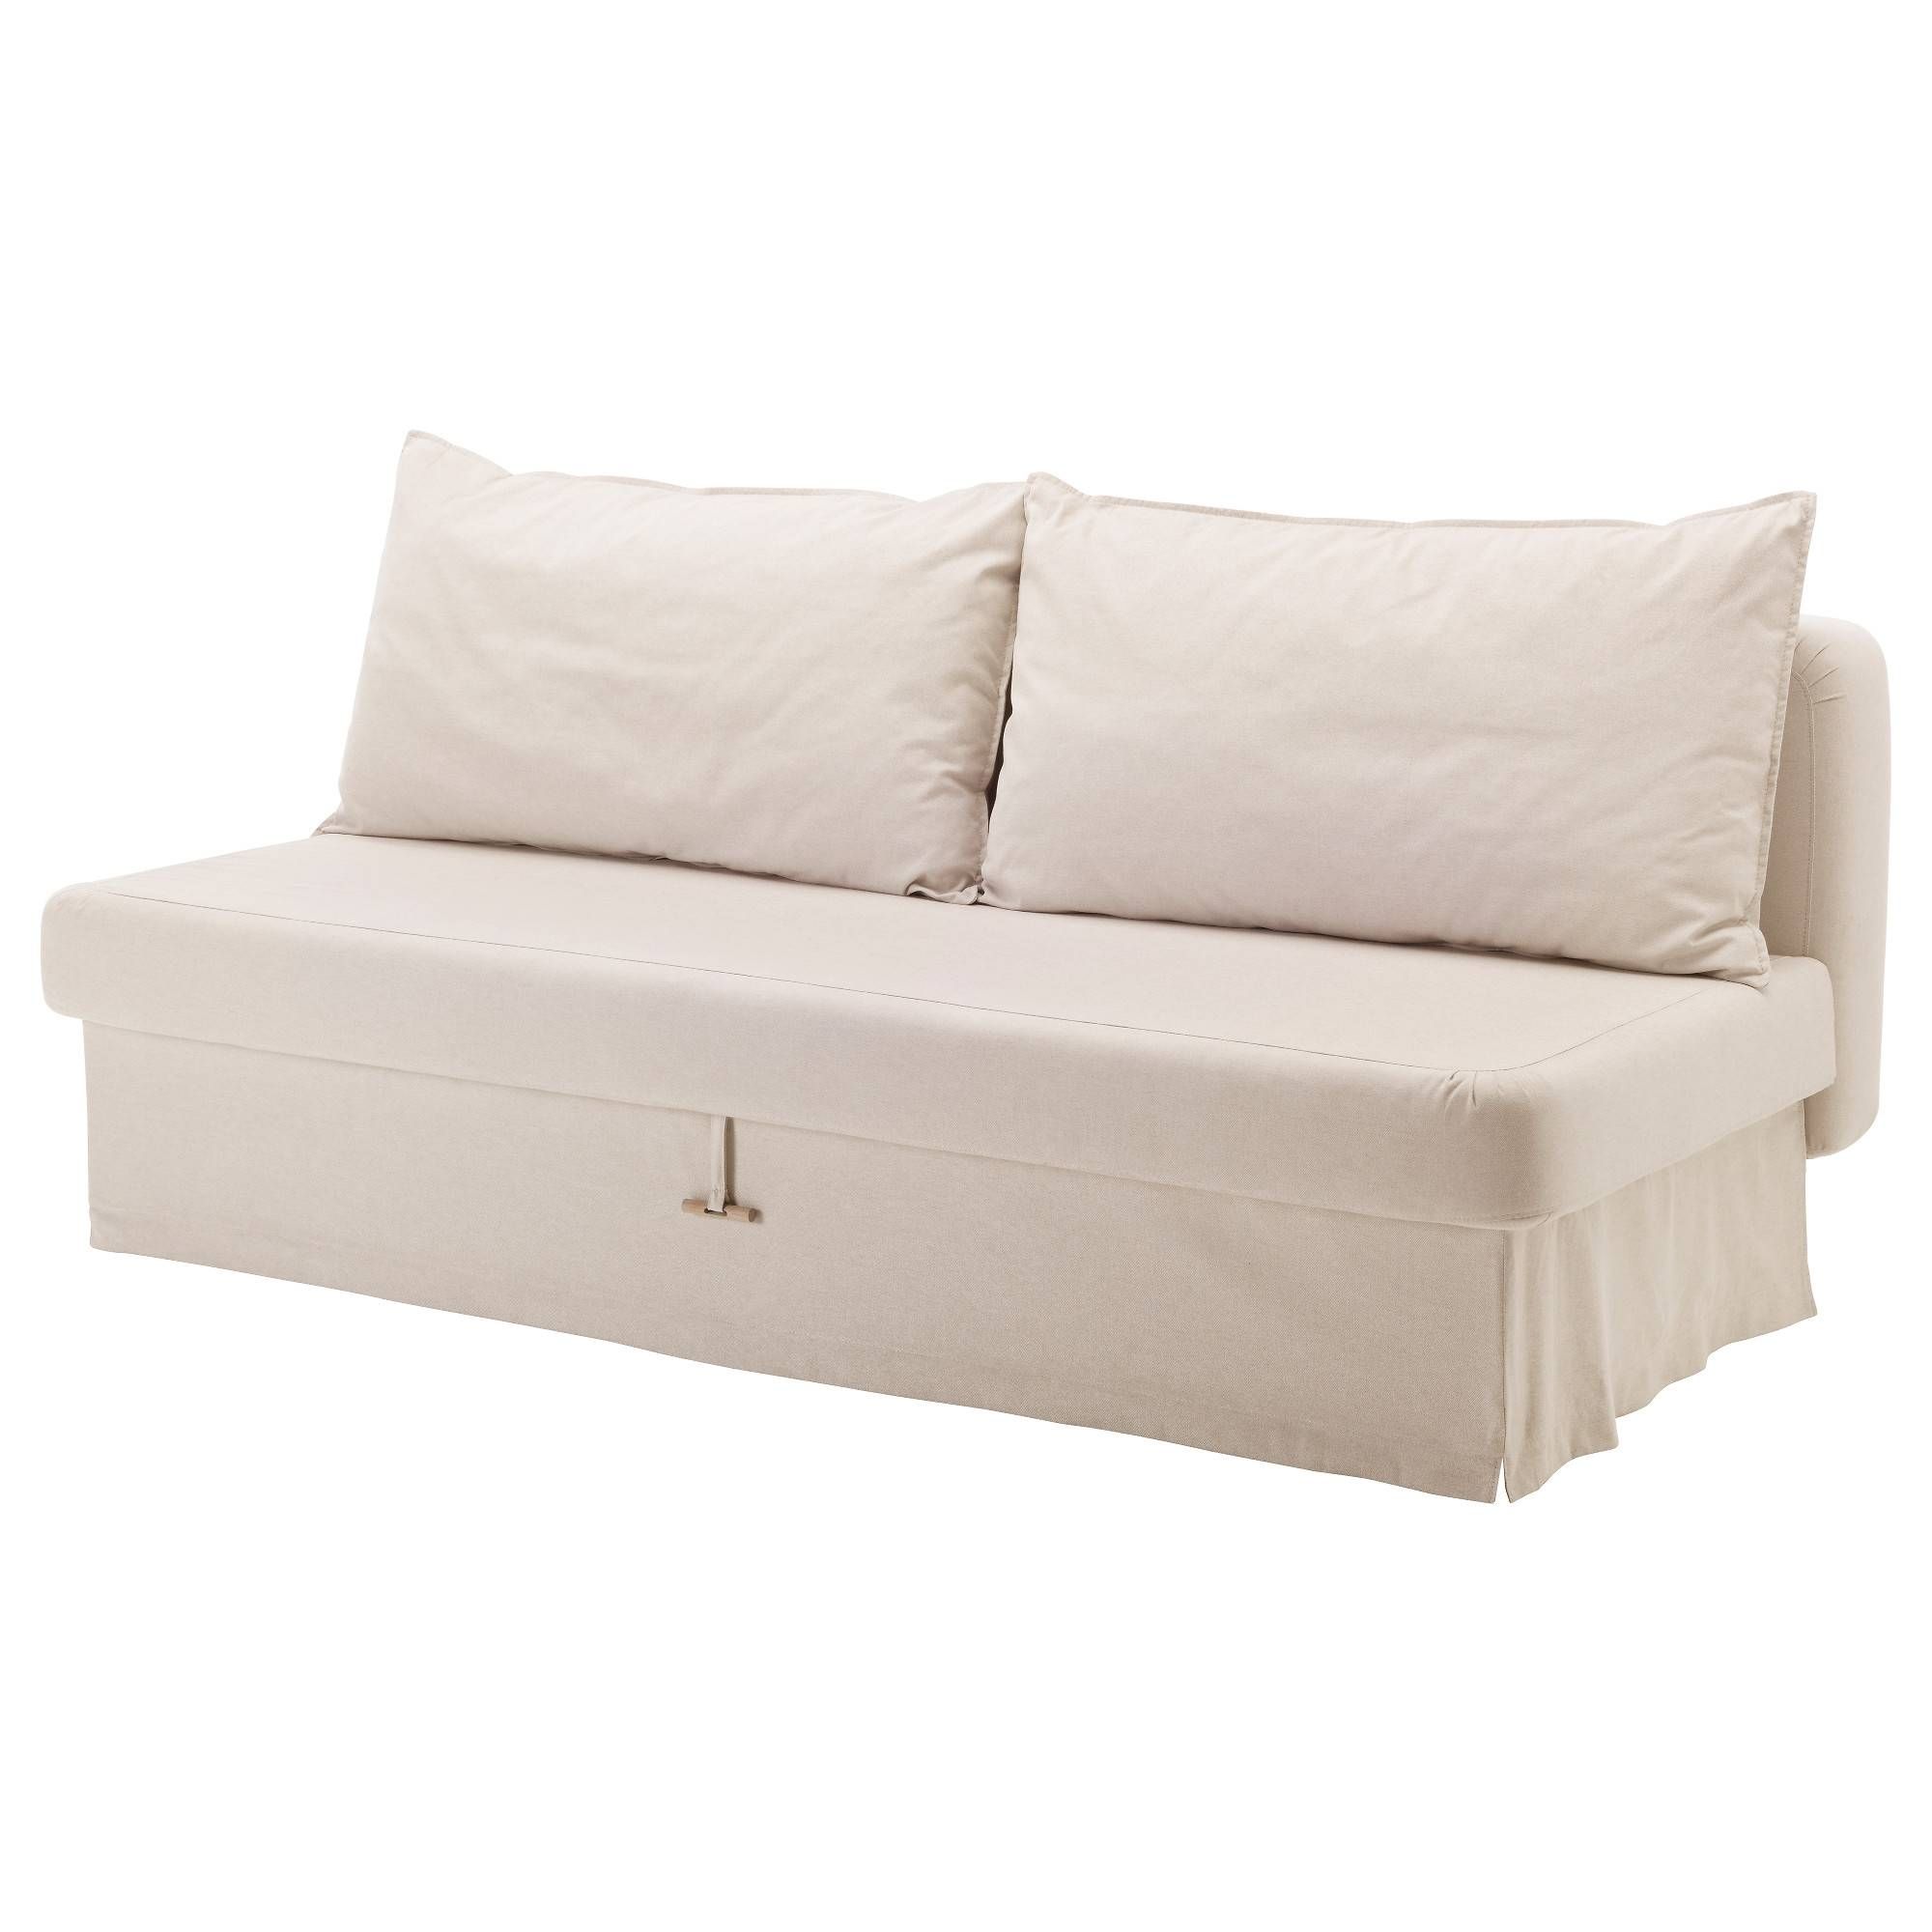 Himmene Three Seat Sofa Bed Lofallet Beige – Ikea Throughout Ikea Two Seater Sofas (Photo 24 of 30)